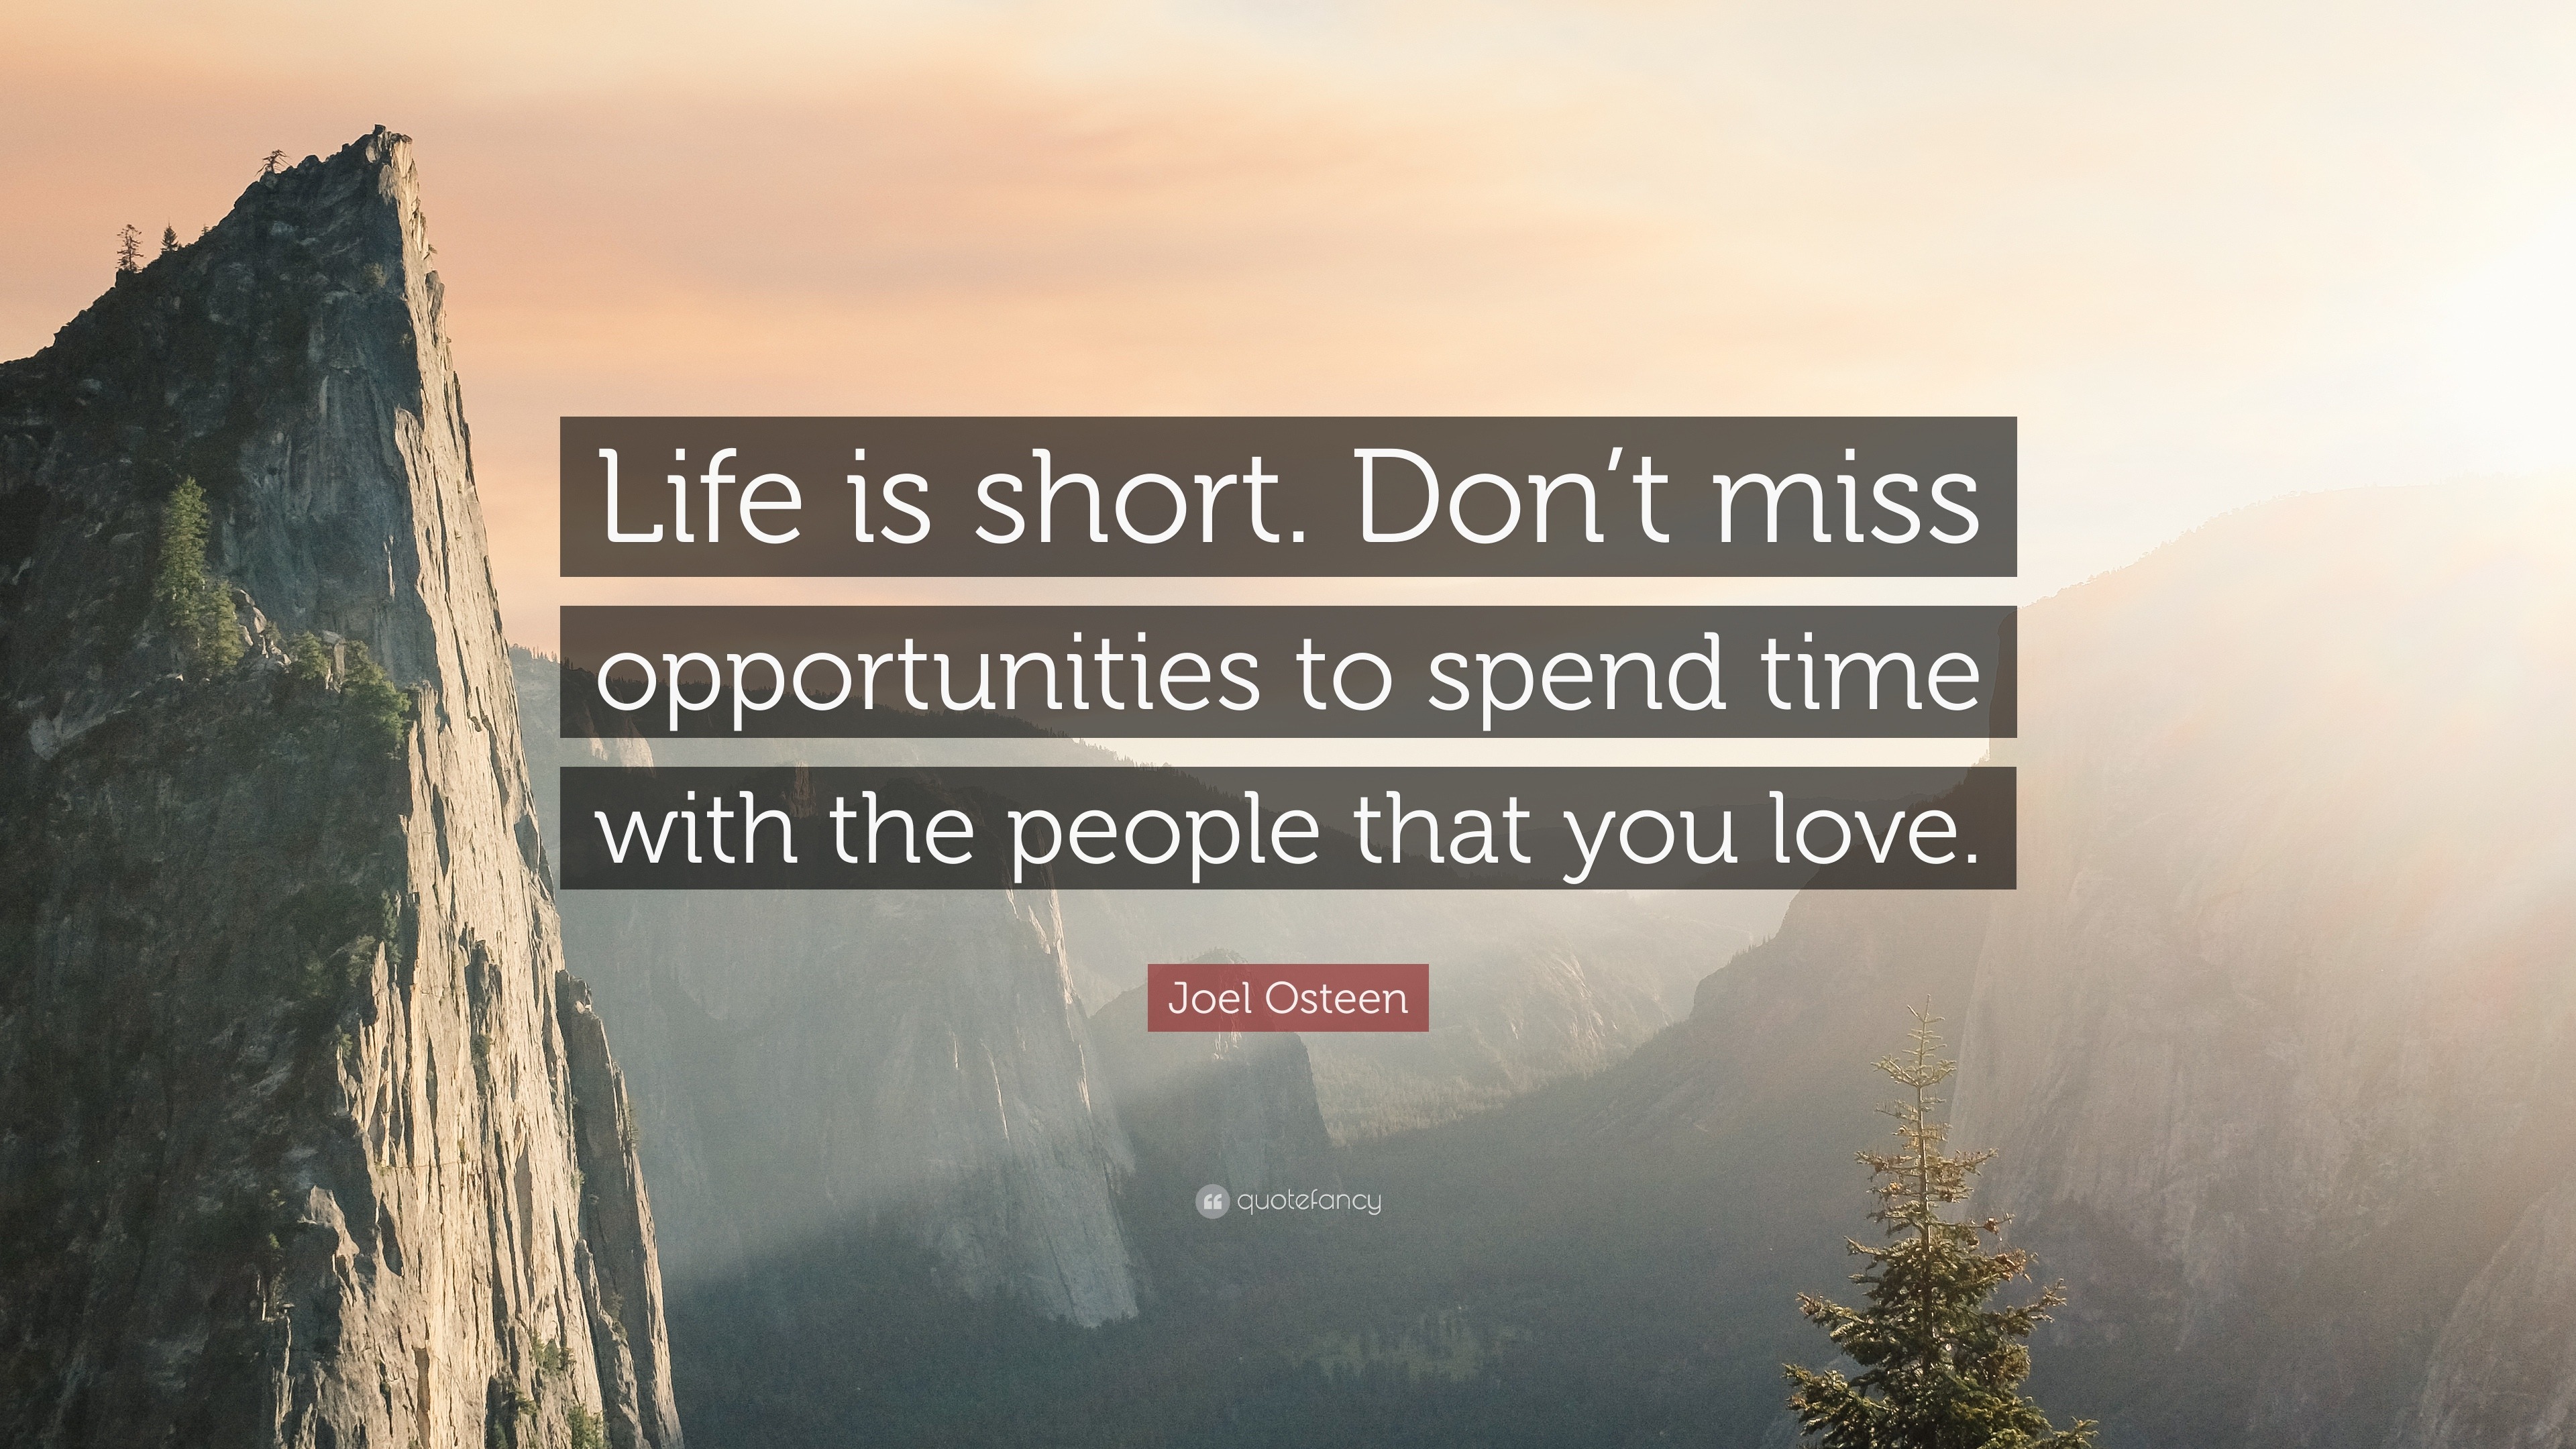 Joel Osteen Quote “Life is short Don t miss opportunities to spend